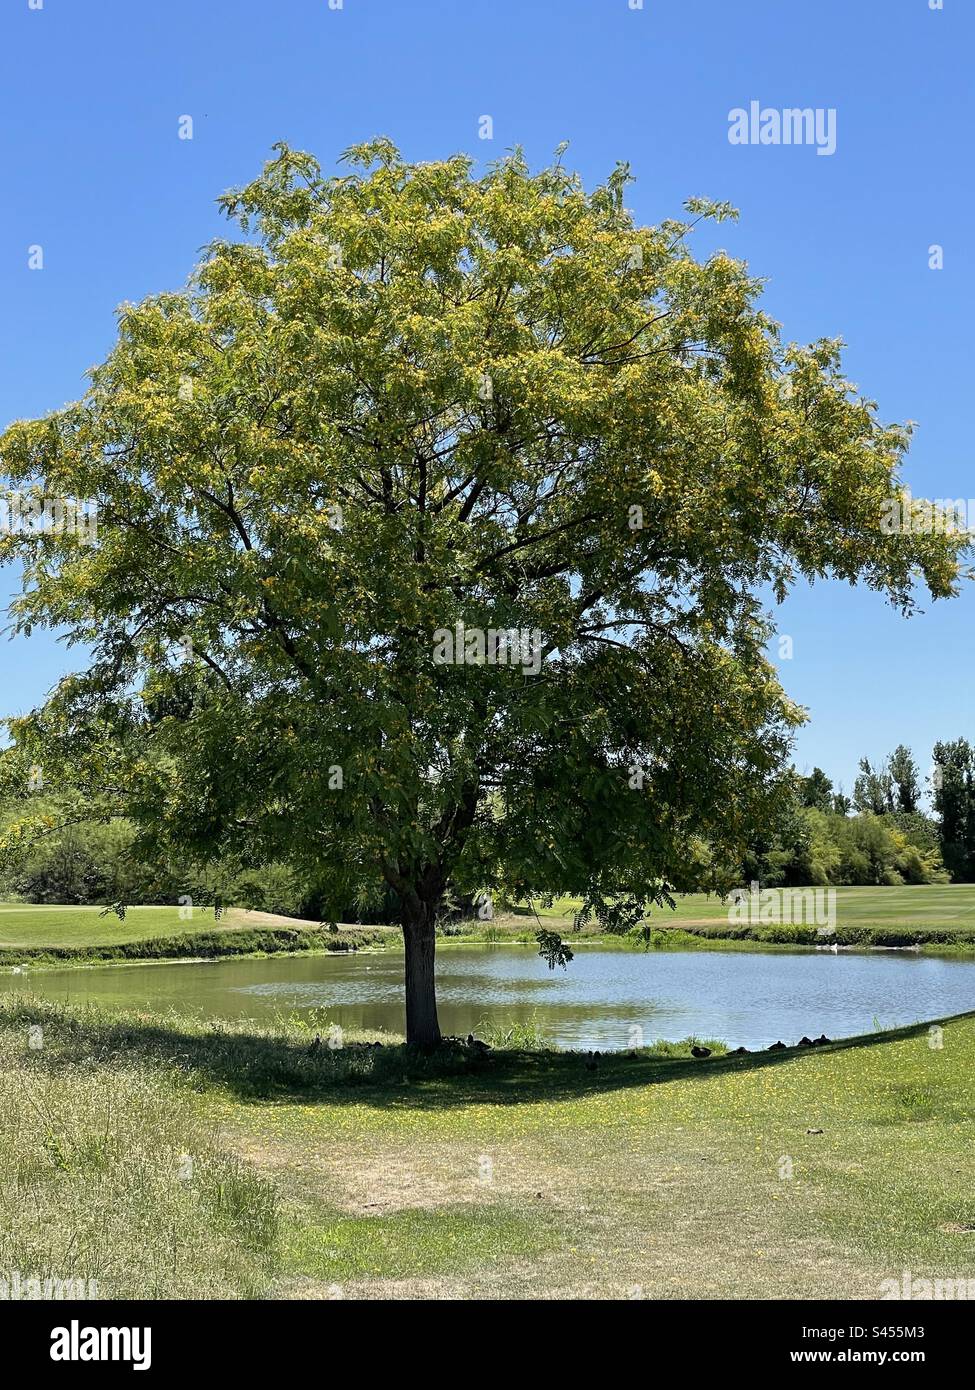 Yellow blooming Rosewood tree, Tipuana Tipu, brilliant blue sky, golf course pond, ducks hiding in the shadows from the hot sun, Scottsdale, Arizona Stock Photo